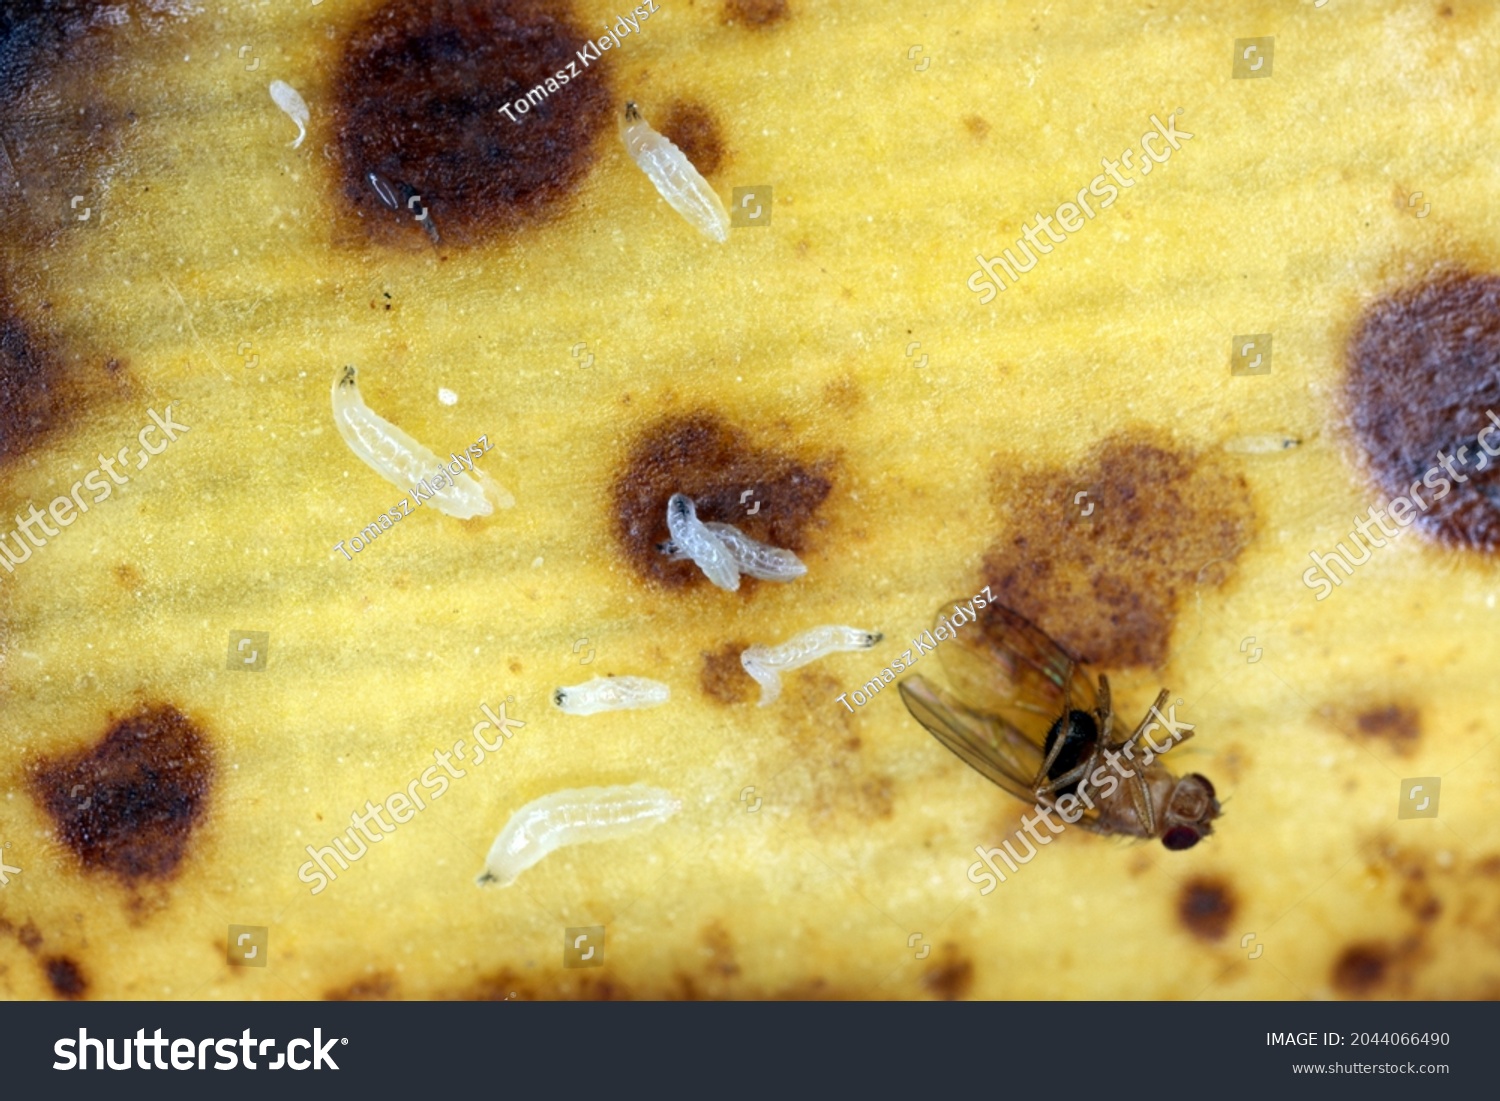 A ot of larvae - maggots and dead adult of Common fruit fly or vinegar fly - Drosophila melanogaster. It is a species of fly in the family Drosophilidae, pest of fruits and food made from fruits #2044066490